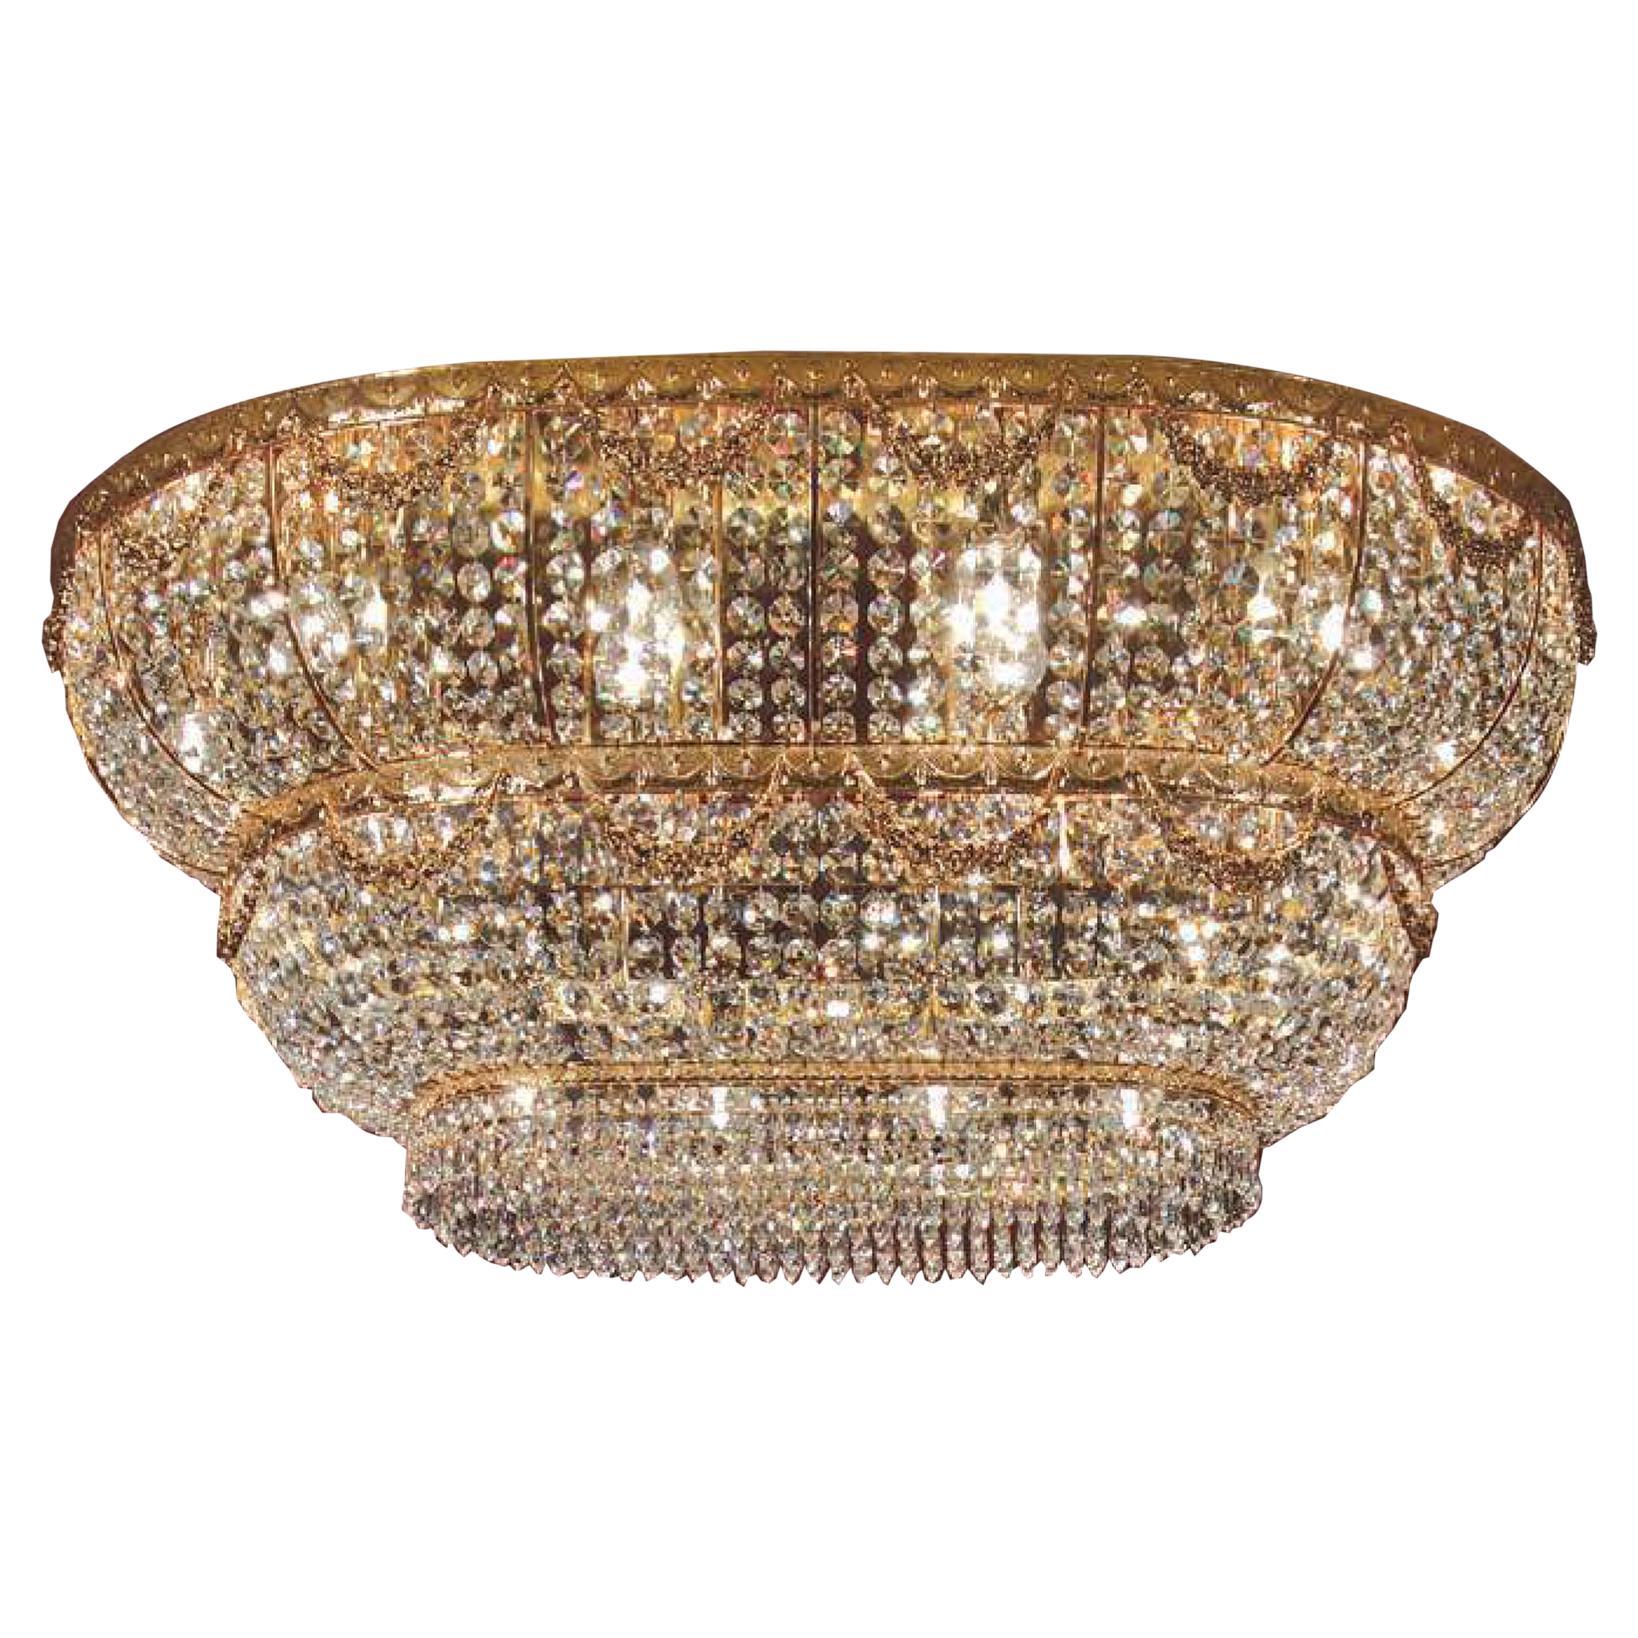 Majestic Italian Villa Ceiling Lamp in 24kt Gold Plate with Transparent Crystals